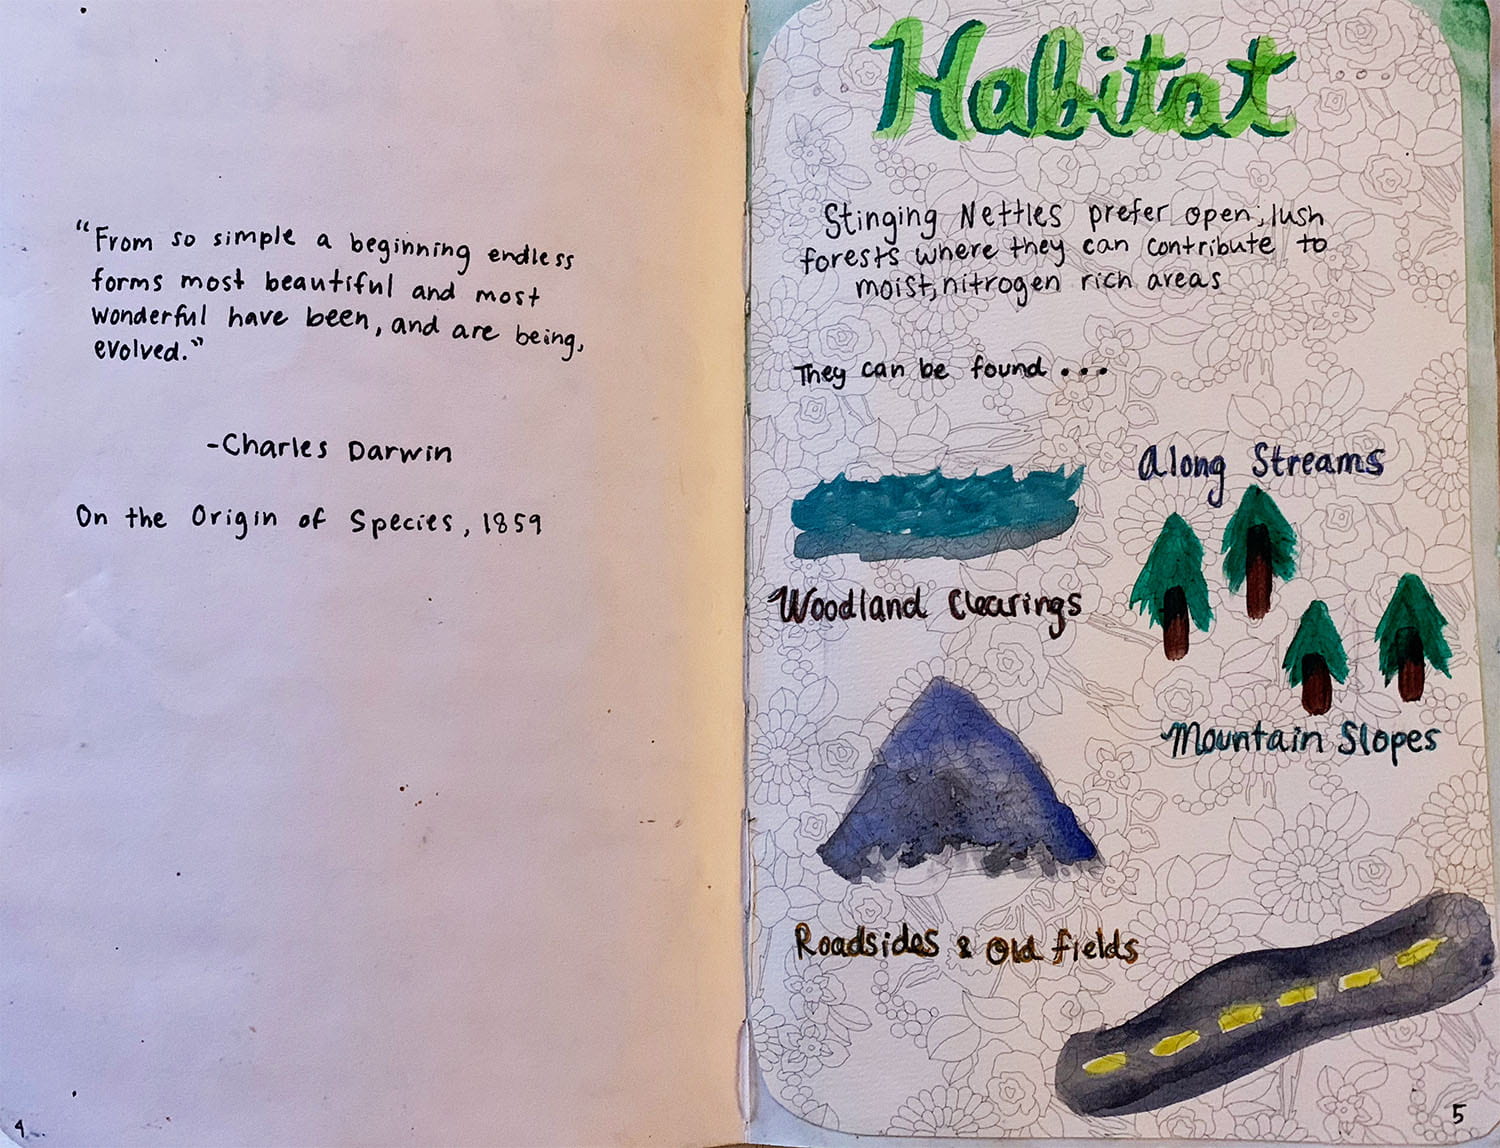 journal entry with a Charles Darwin quote and drawings showing where stinging nettles can be found